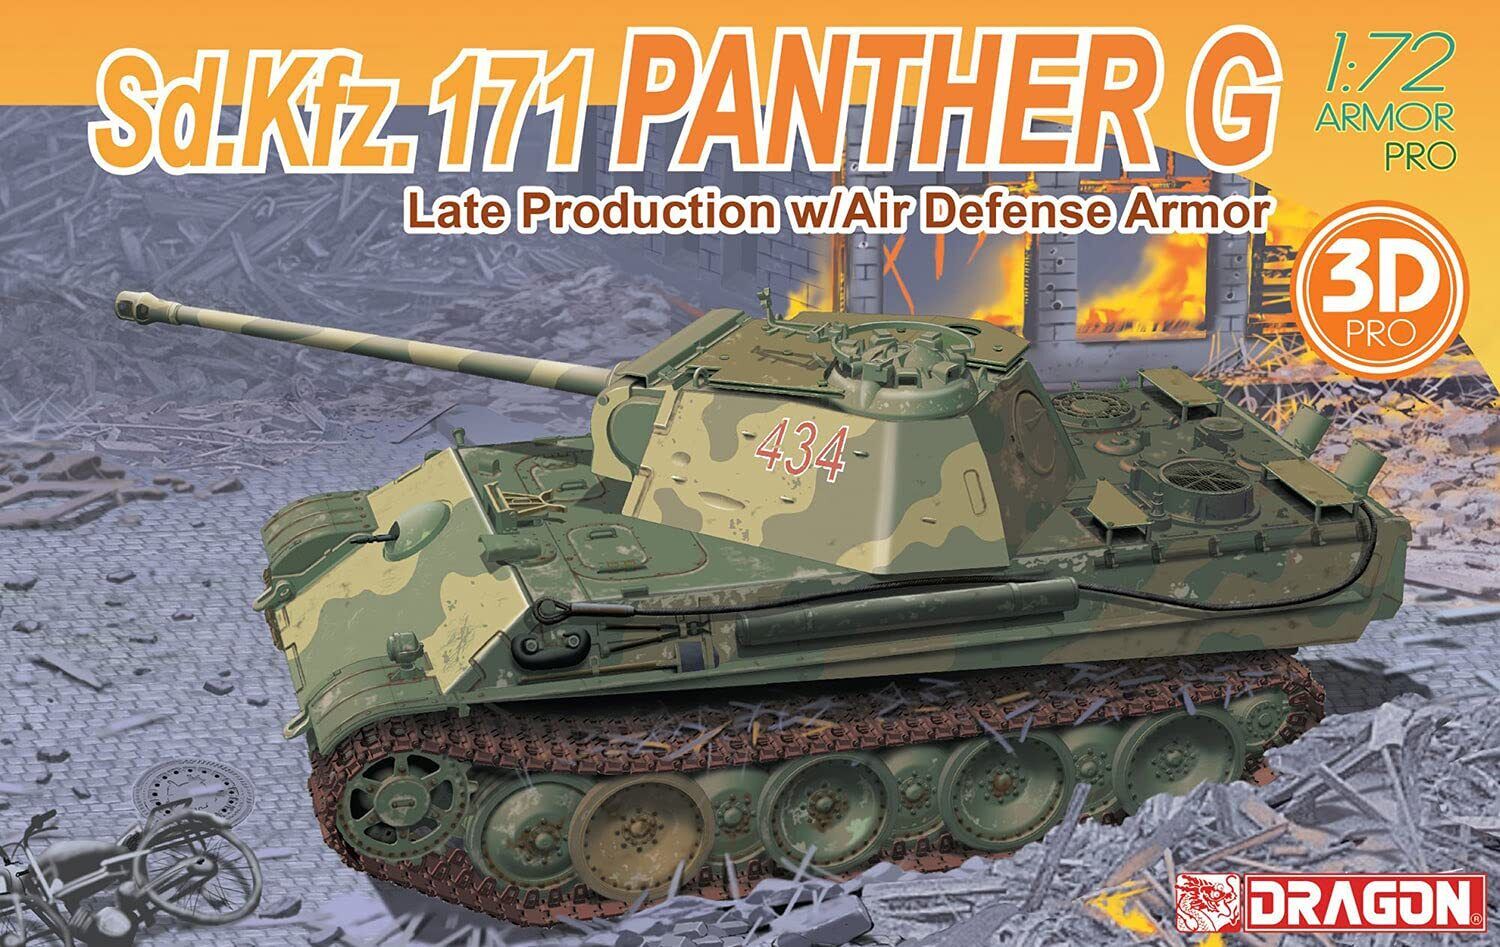 1/72 World War II German Army Panther G with anti-aircraft armor plastic model D